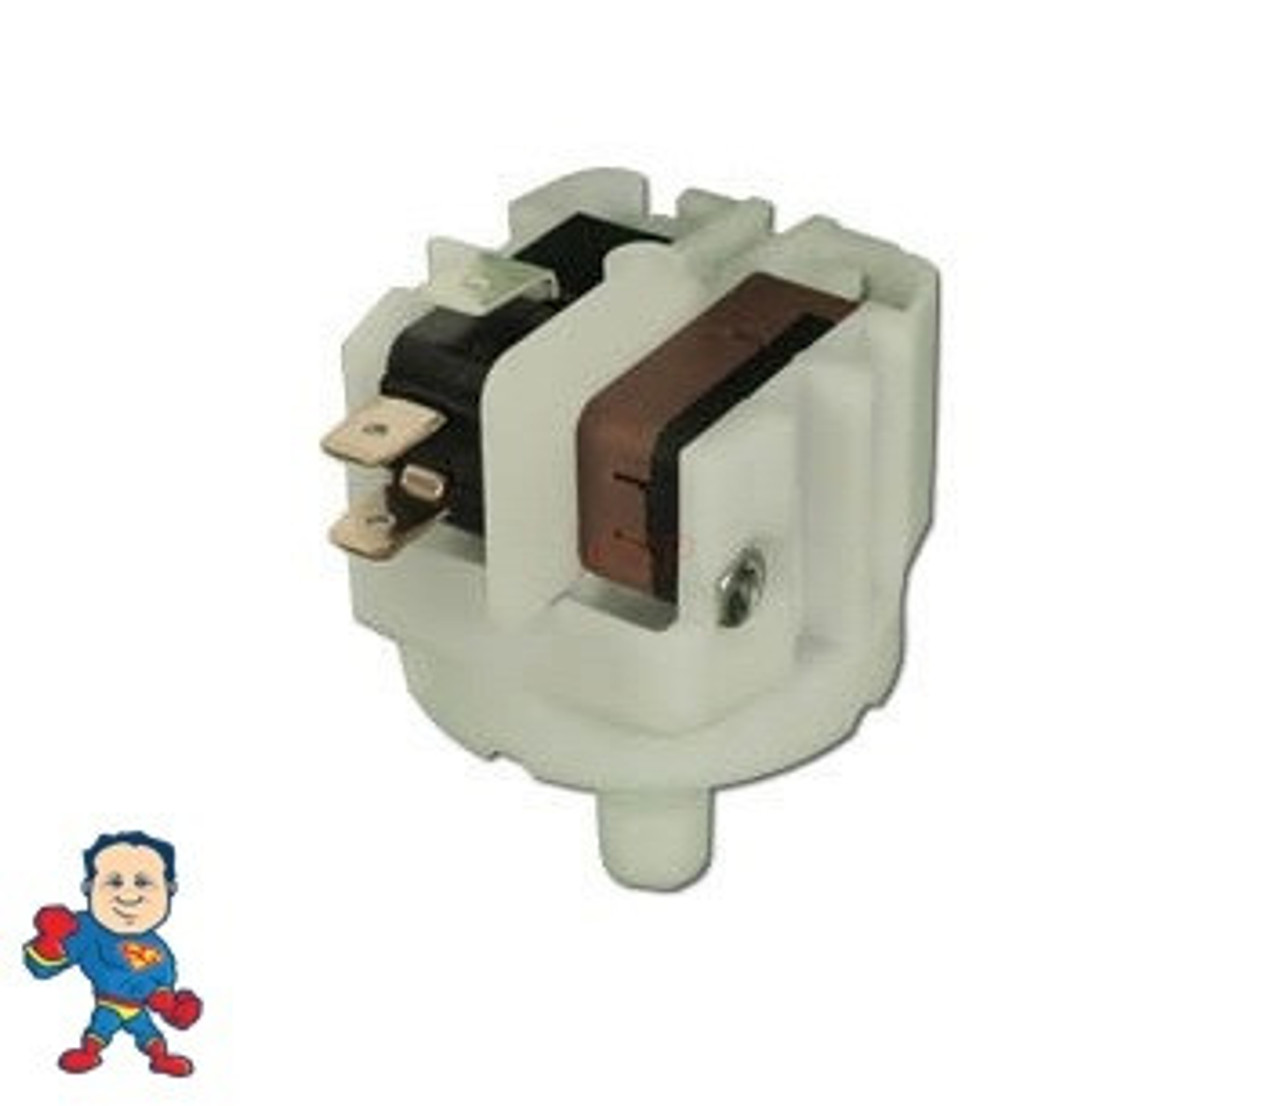 Vacuum Switch, PresAirTrol, 21A, 1/8"mpt, Adj 135-250" water, Safety Suction